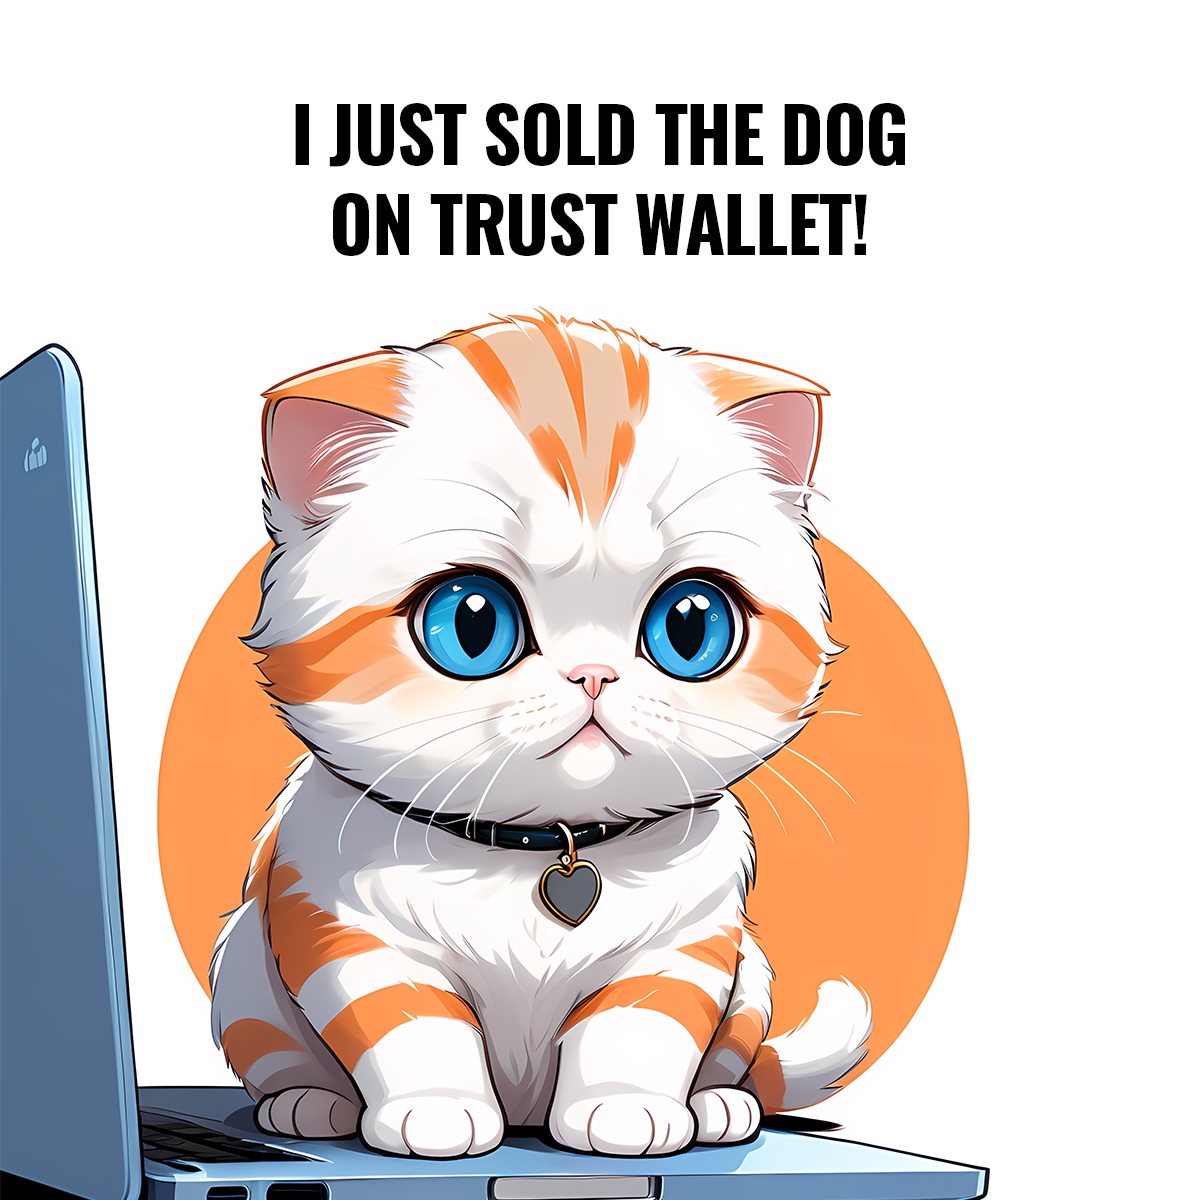 I JUST SOLD THE DOG ON TRUST WALLET!